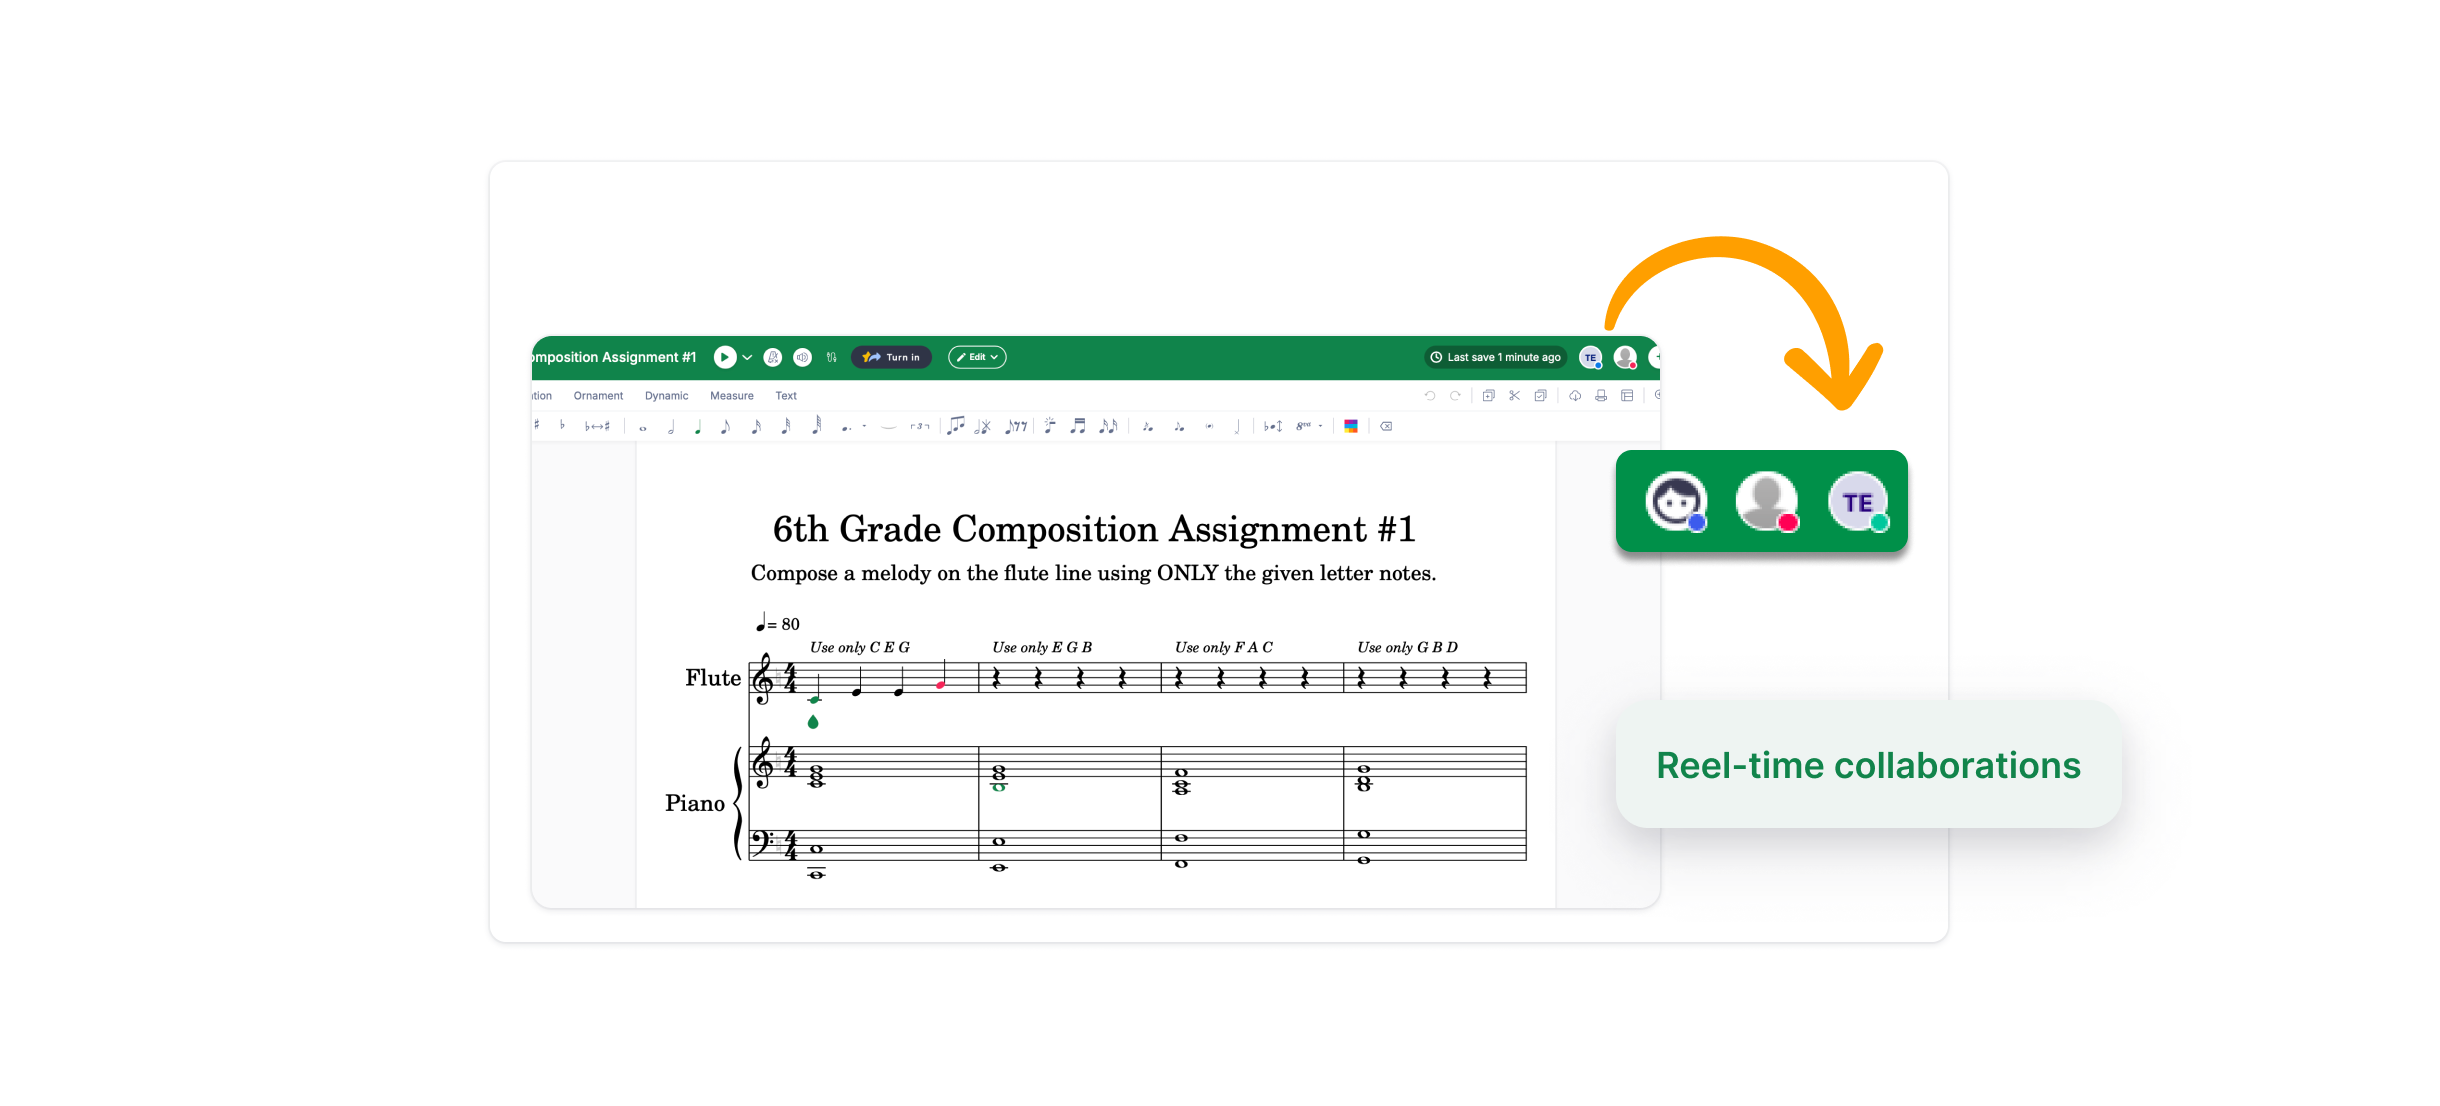 Getting Students Started with Flat for Education's Music Notation Editor